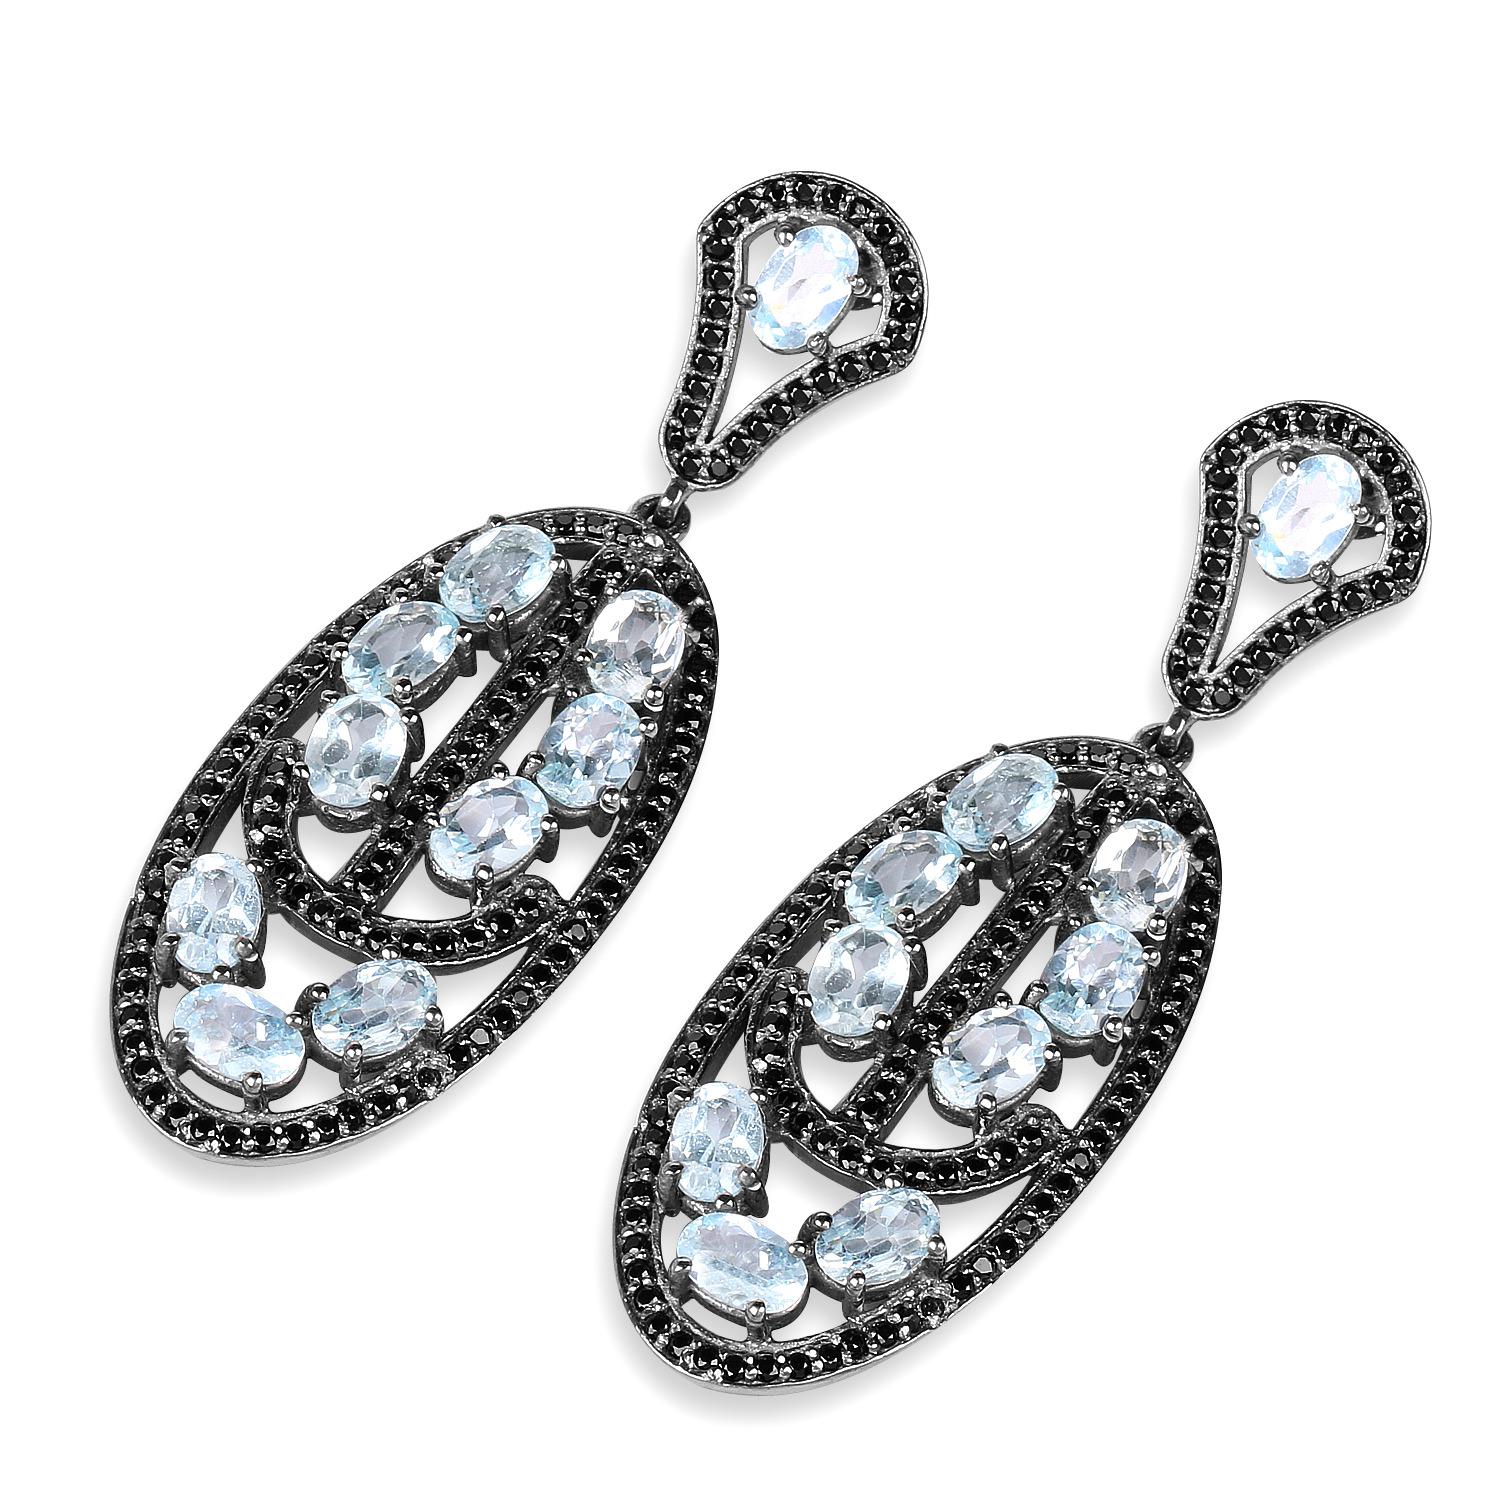 Mixed Cut Blue Topaz Dangle Earrings With Black Spinels 13.9 Carats Rhodium Plated Silver For Sale